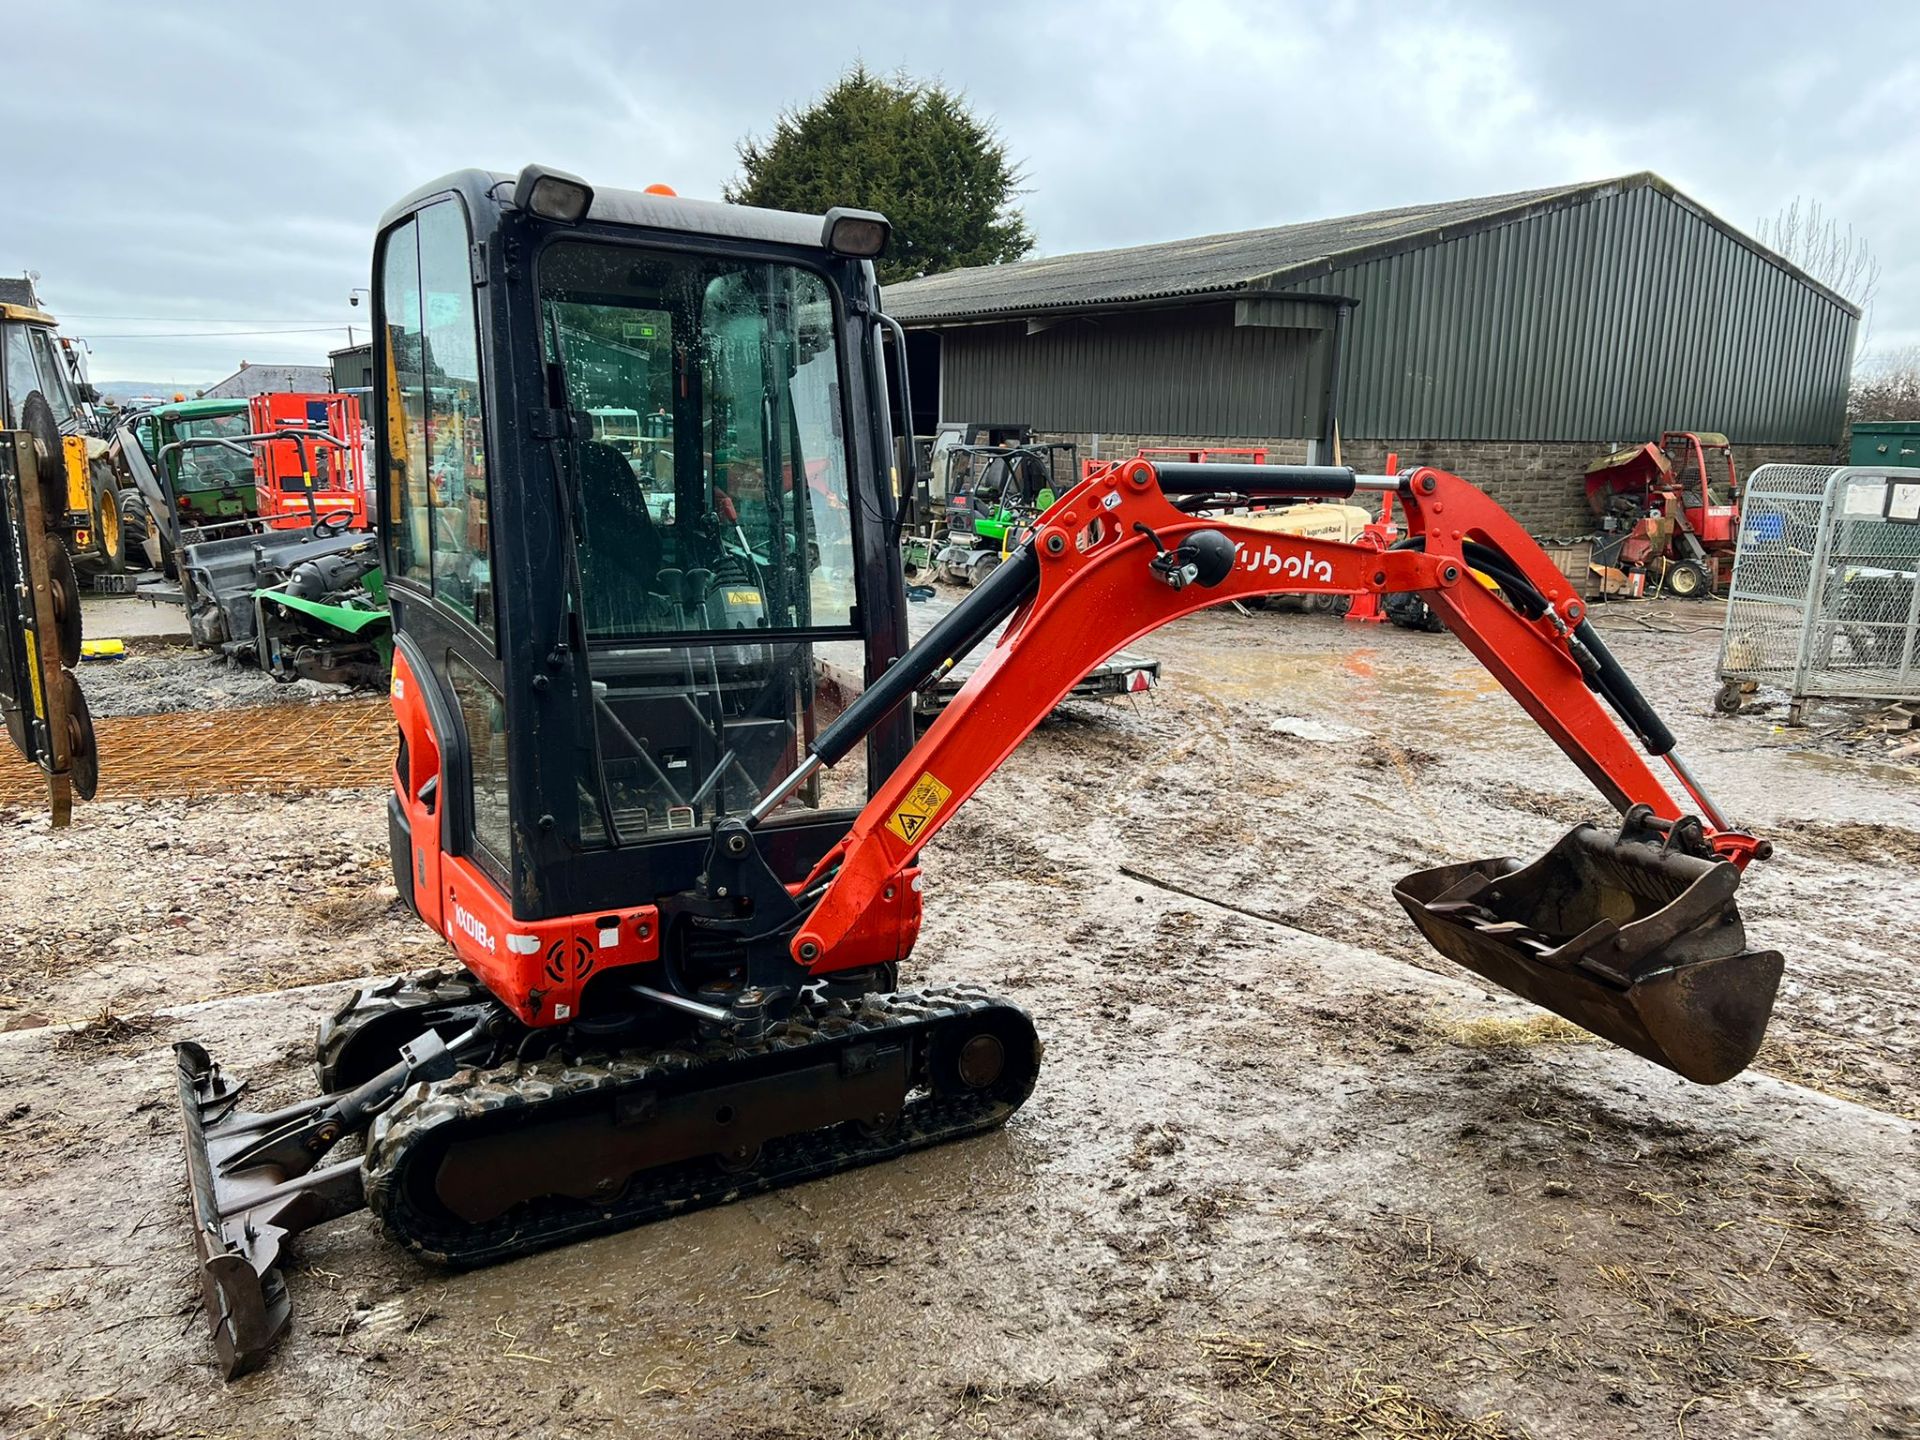 2018 KUBOTA KX018-4 1.8 TON MINI DIGGER, RUNS DRIVES AND DIGS, SHOWING A LOW 1681 HOURS - Image 9 of 20